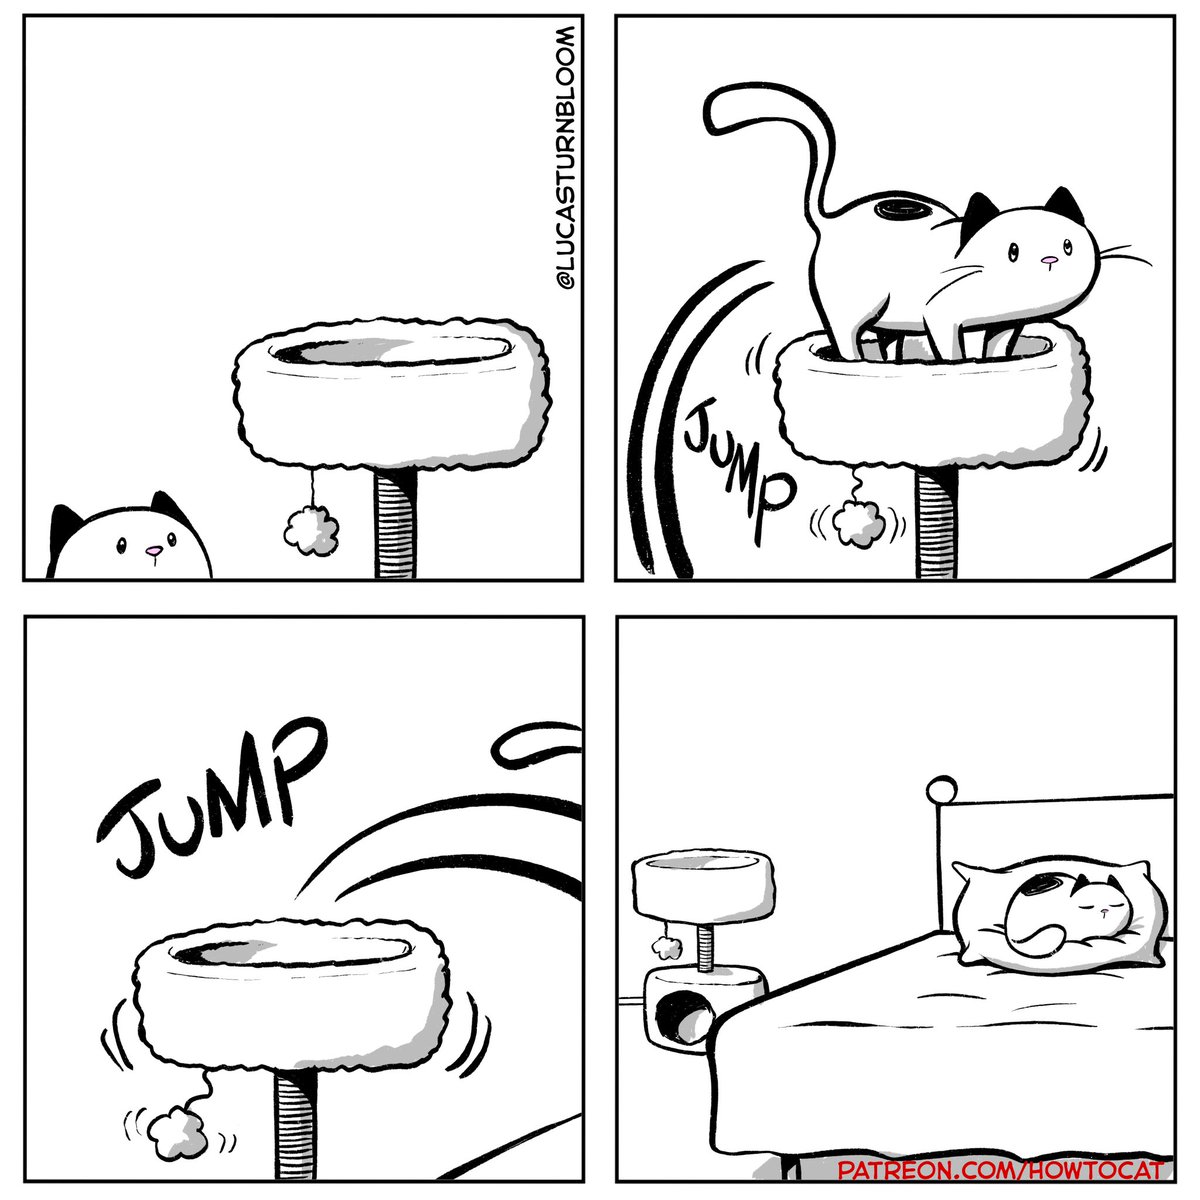 NEW COMIC: “Getting Comfy” . Seriously, what’s even the point of a cat tree? Other than being a ladder? .. Subscribe on Patreon! patreon.com/HowToCat